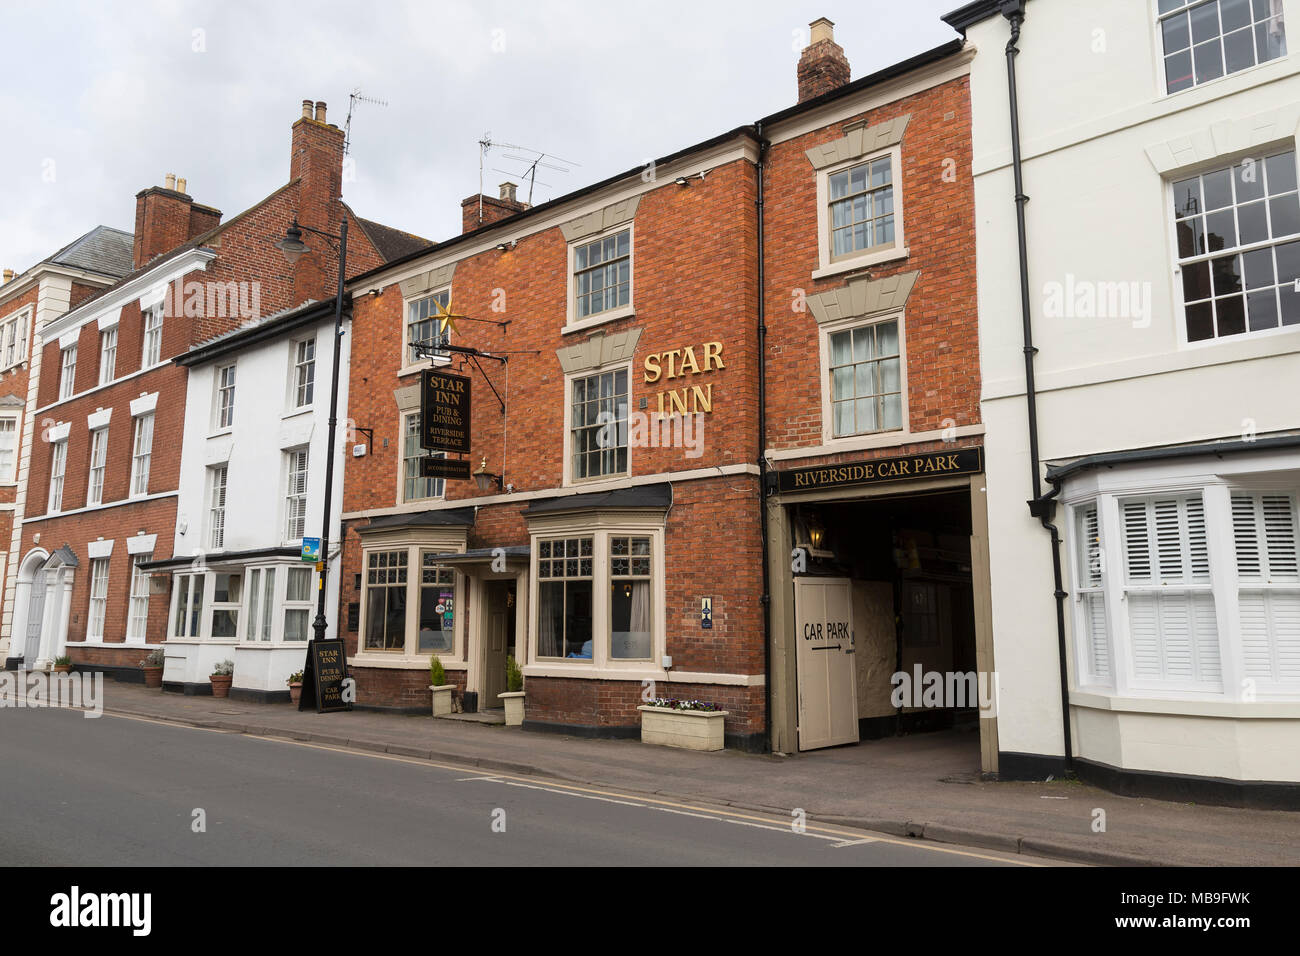 Star Inn and other Georgian properties, High Street, Pershore, Worcestershire, England, UK Stock Photo